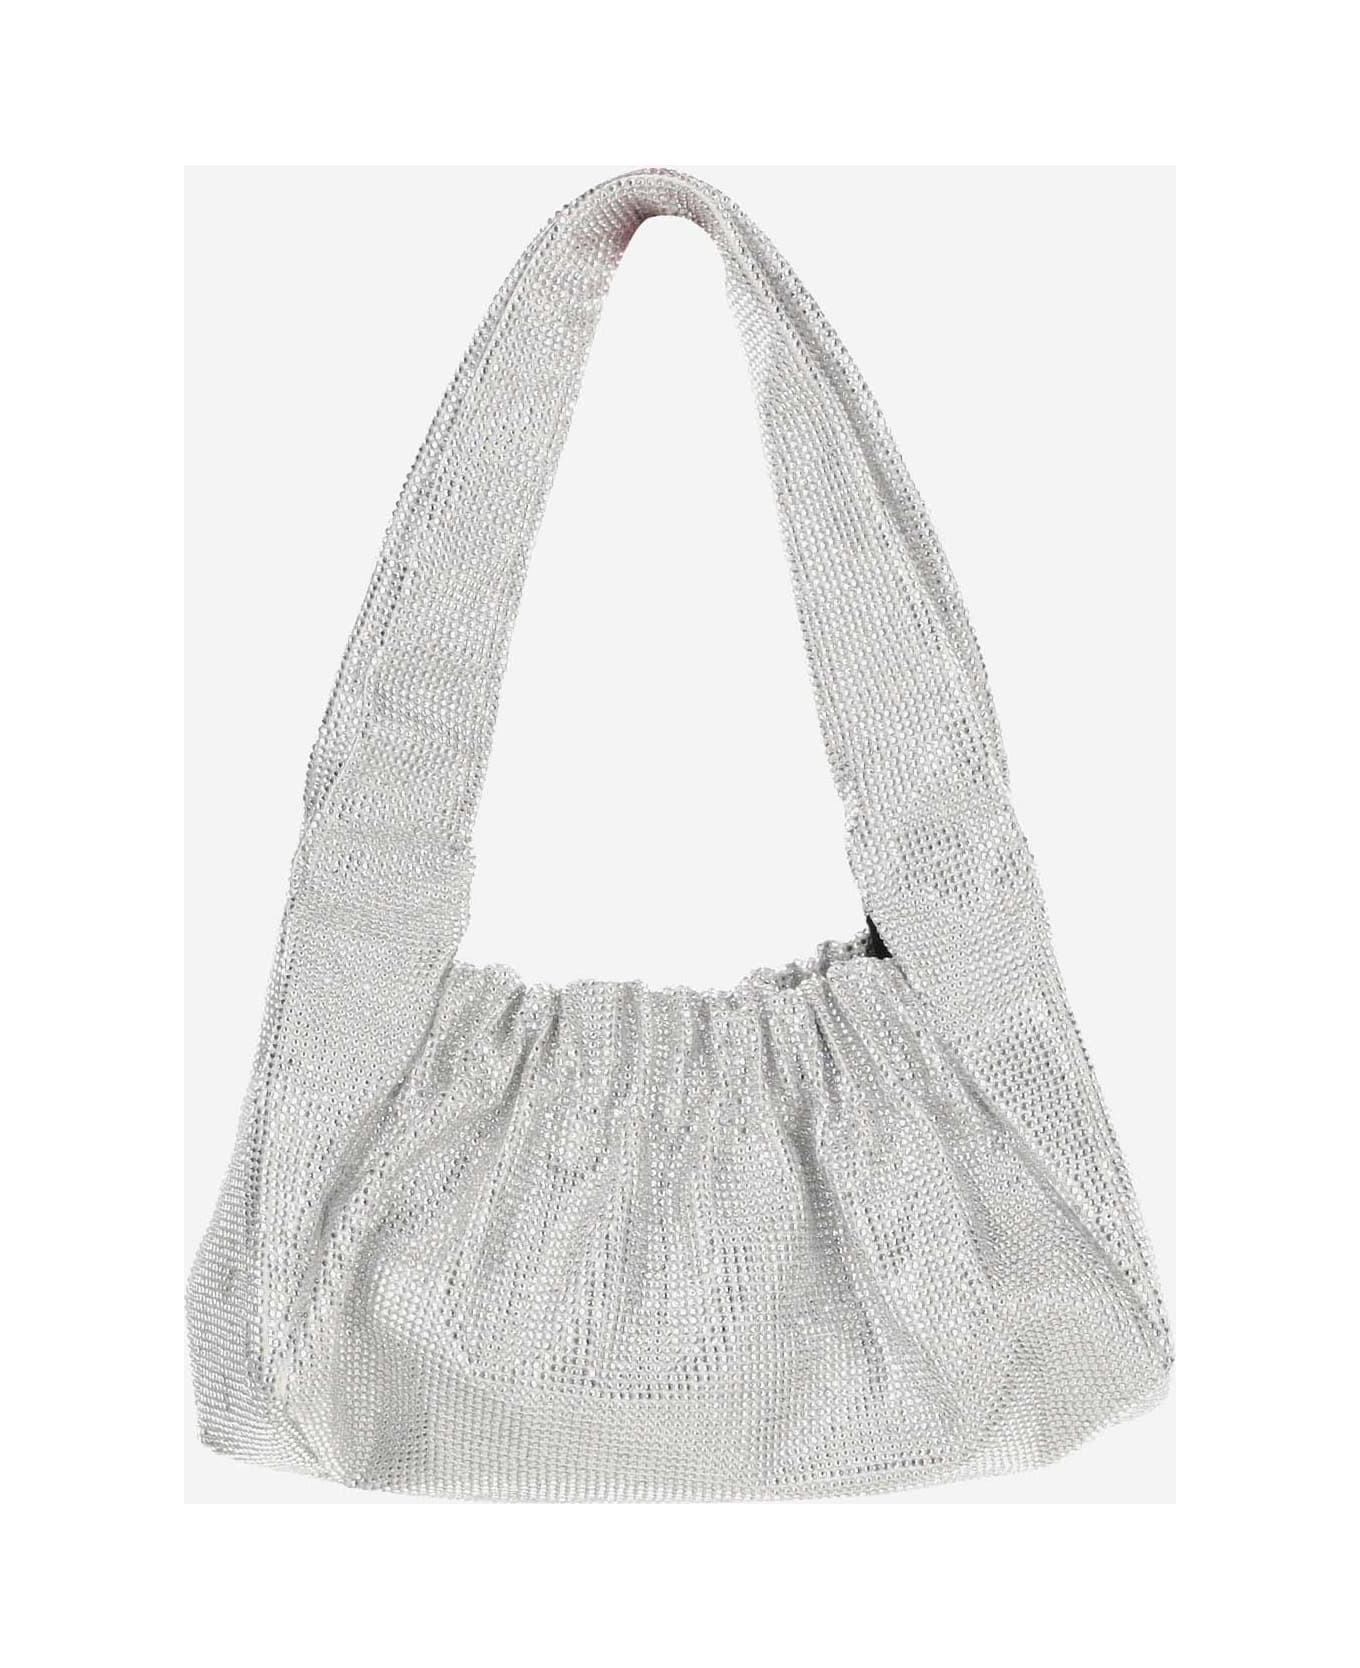 Patou Le Biscuit Satin And Rhinestone Bag - White トートバッグ